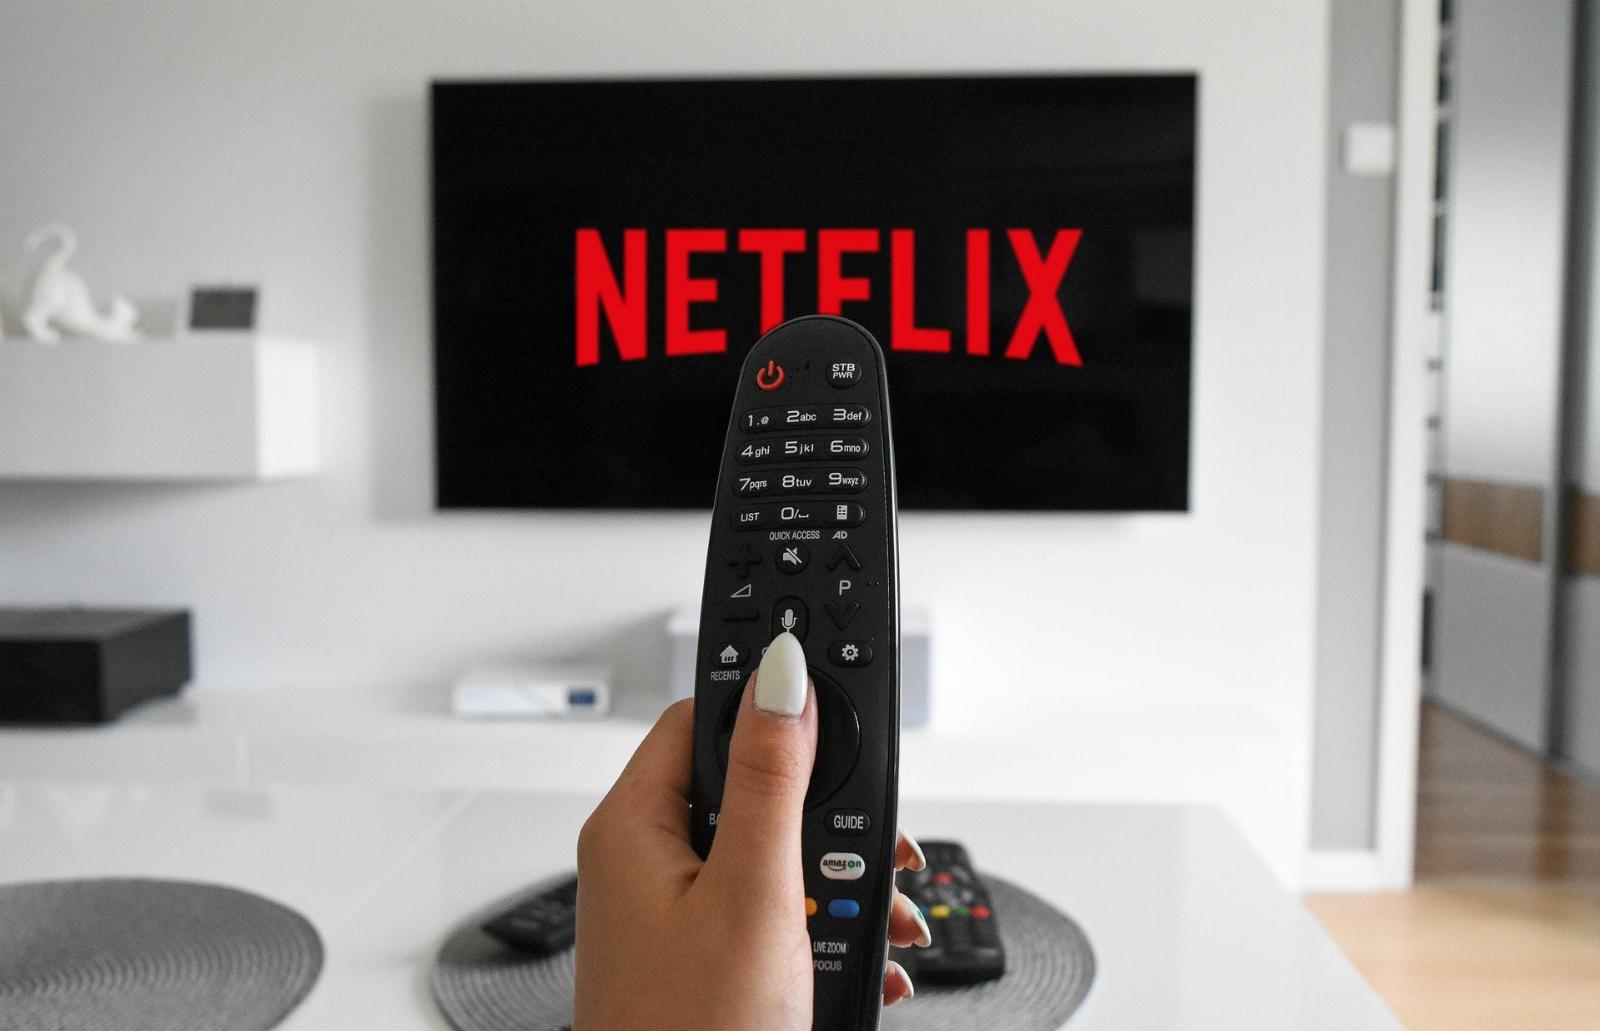 Daily Crunch: Netflix’s new sharing restrictions force subscribers to select a primary viewing location